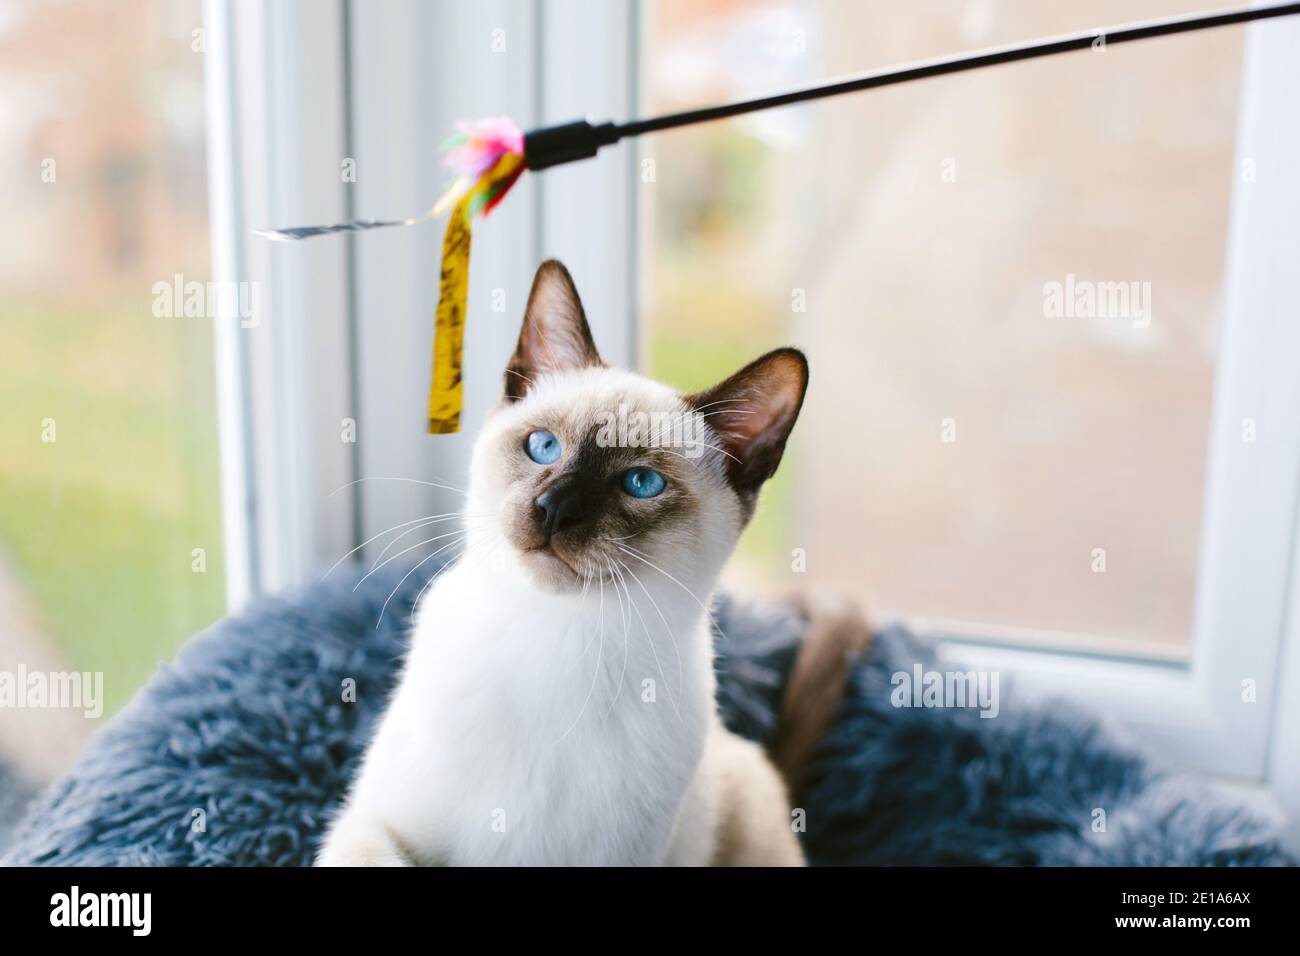 A 6-month old Siamese cat staring at a cat toy Stock Photo